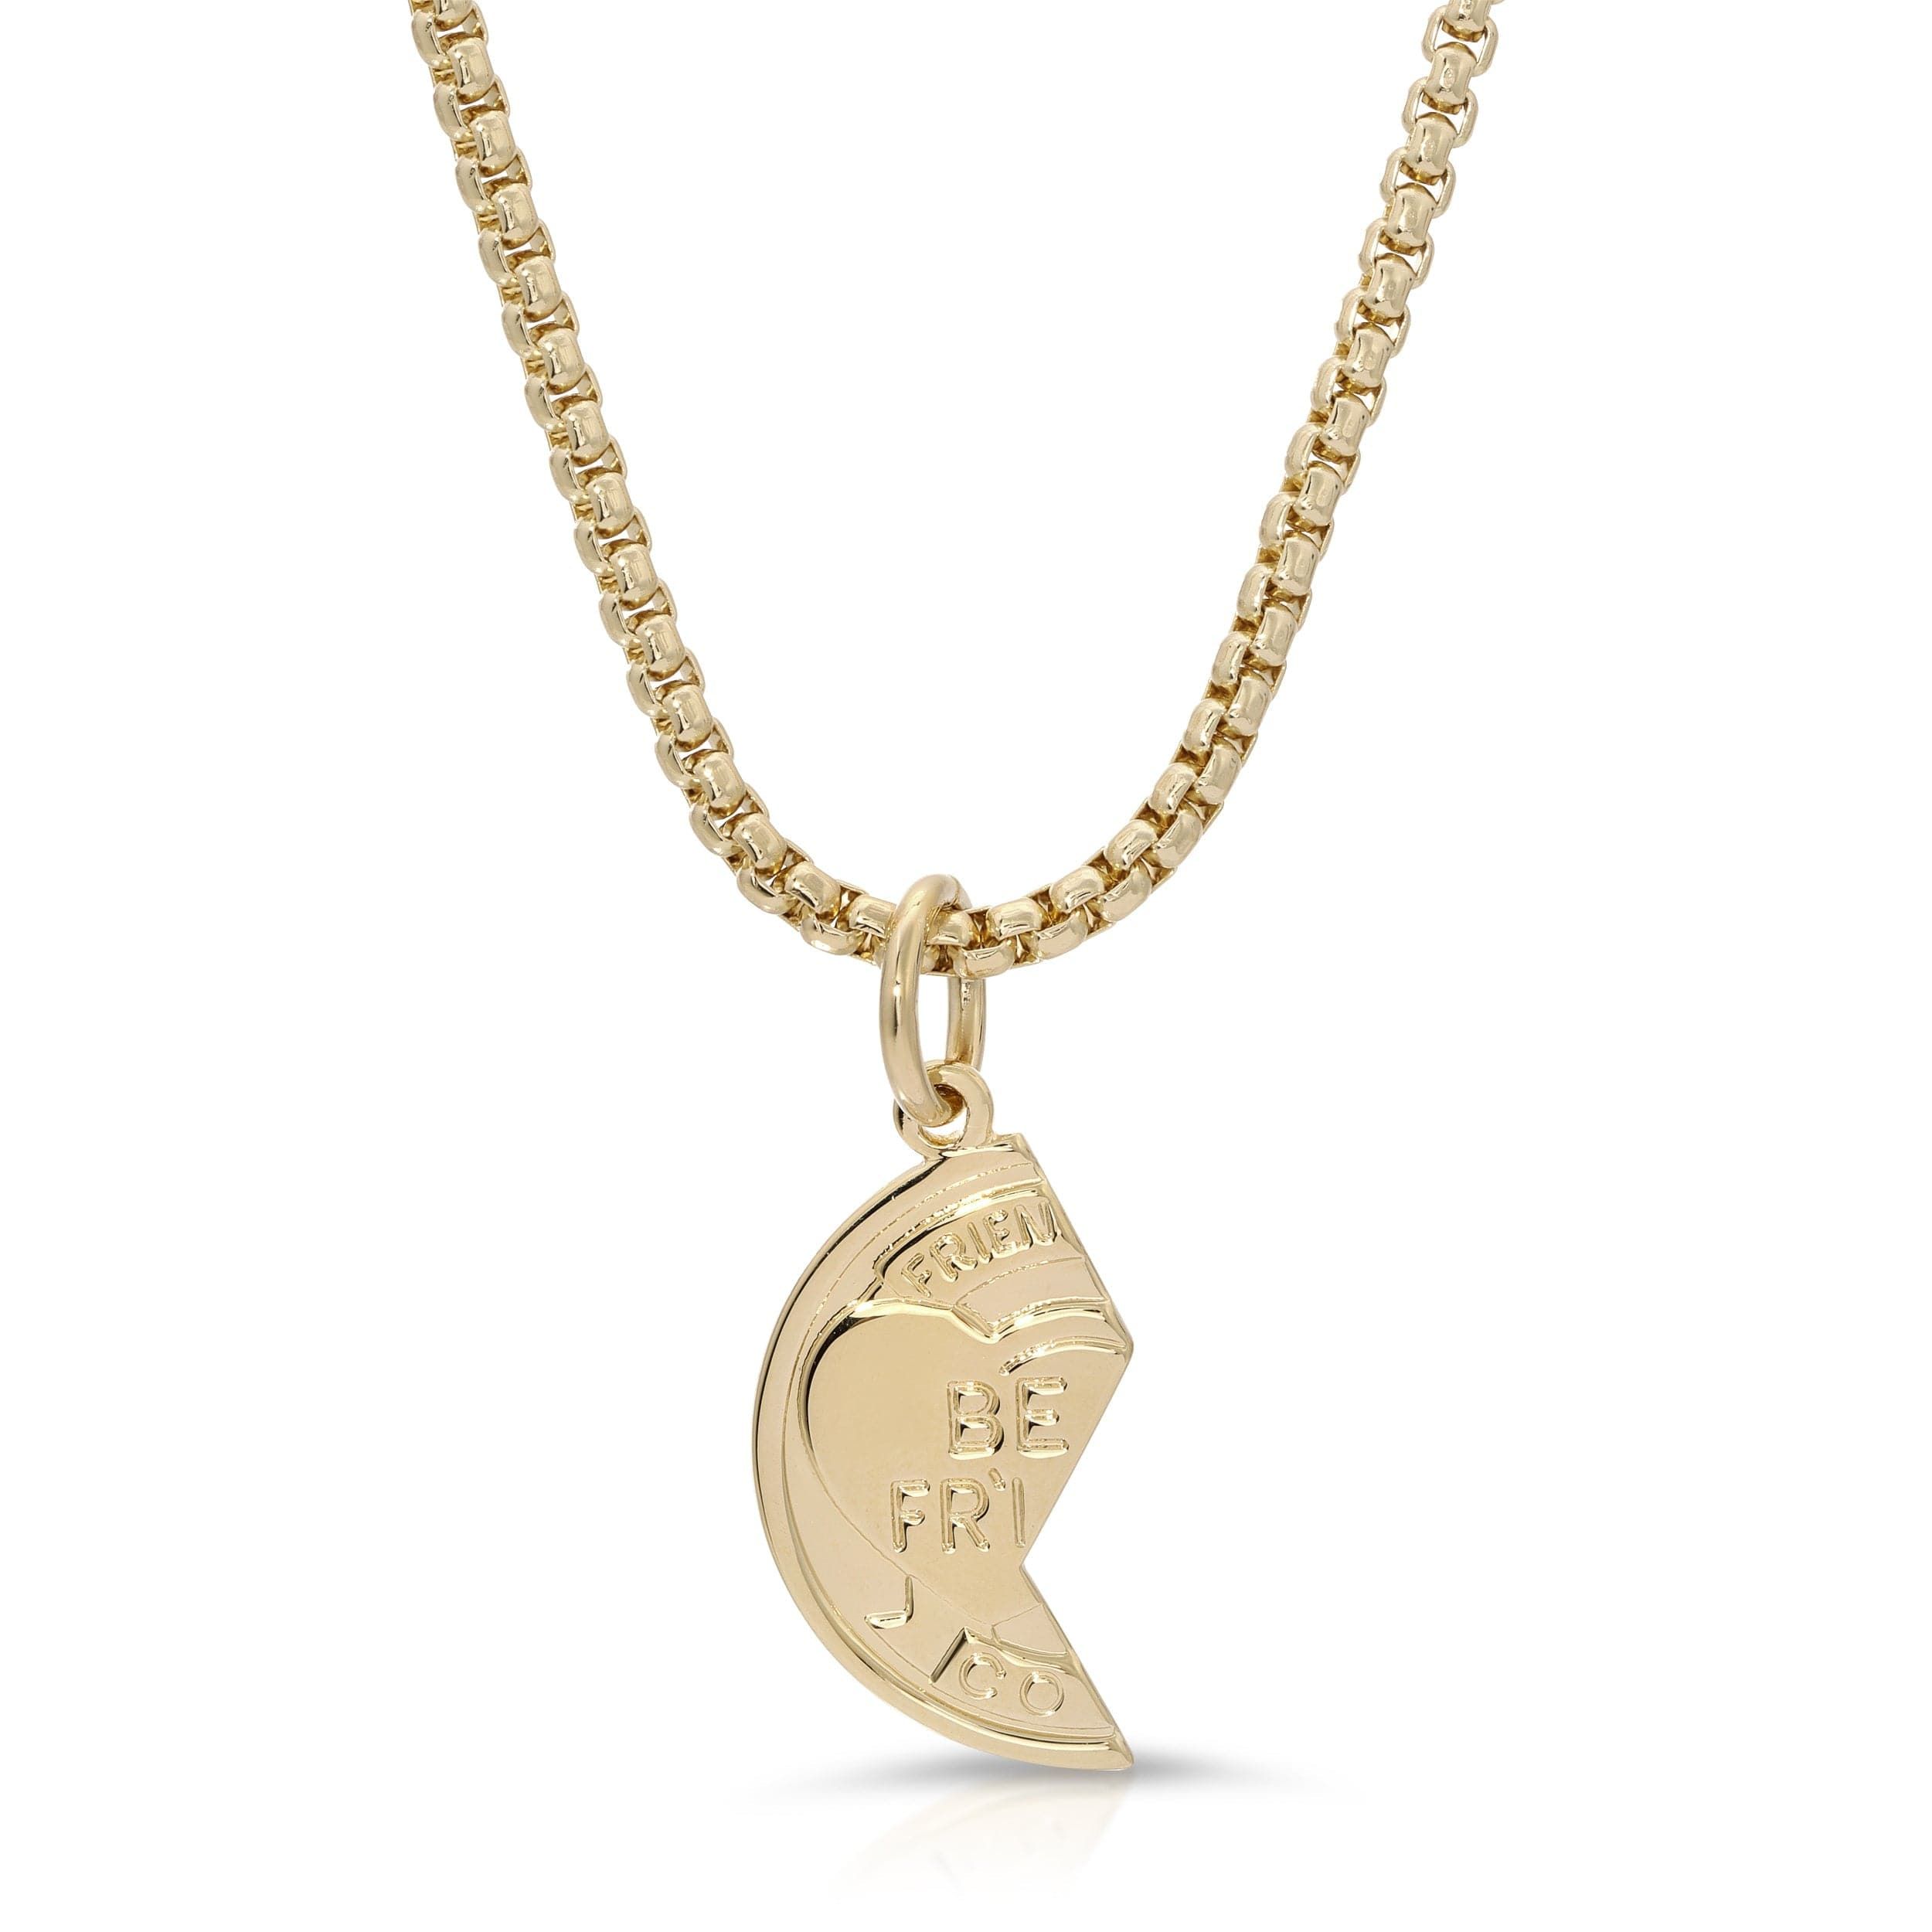 a gold necklace with a small pendant on a chain